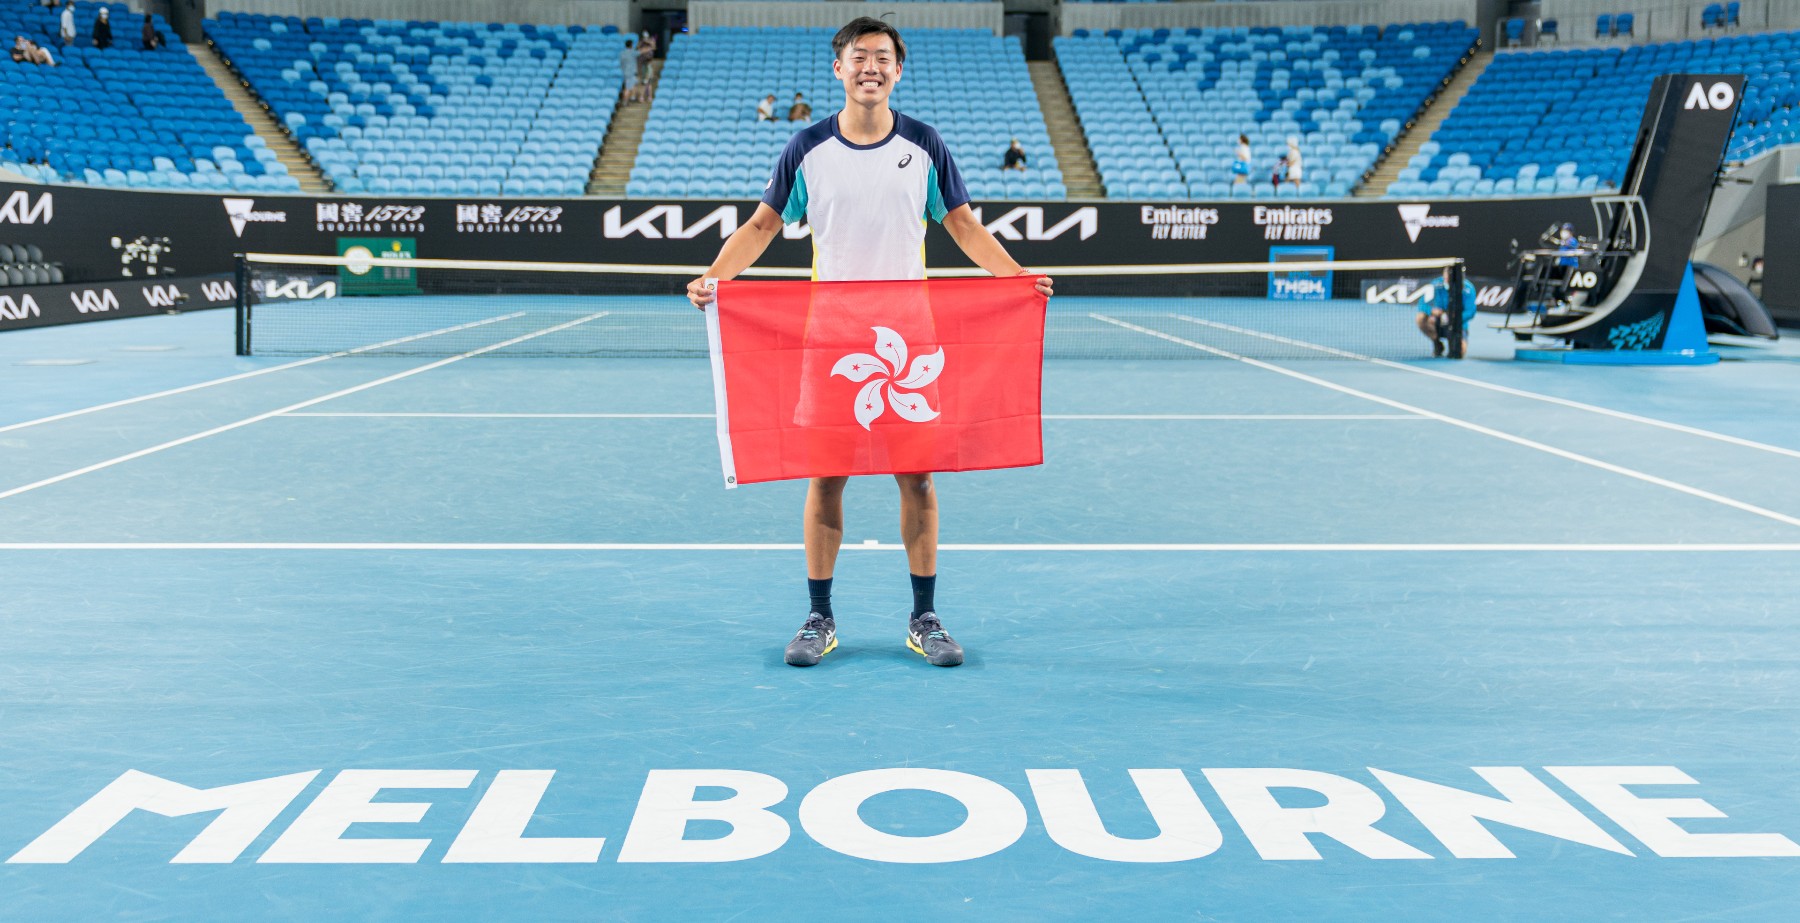 MELBOURNE, AUSTRALIA - JANUARY 28: Chak Lam Coleman Wong of Hong Kong poses during the trophy presentation of the Junior Boy’s Doubles Final with partner Bruno Kuzuhara of United States after defeating Alex Michelsen of United States and Adolfo Daniel Val